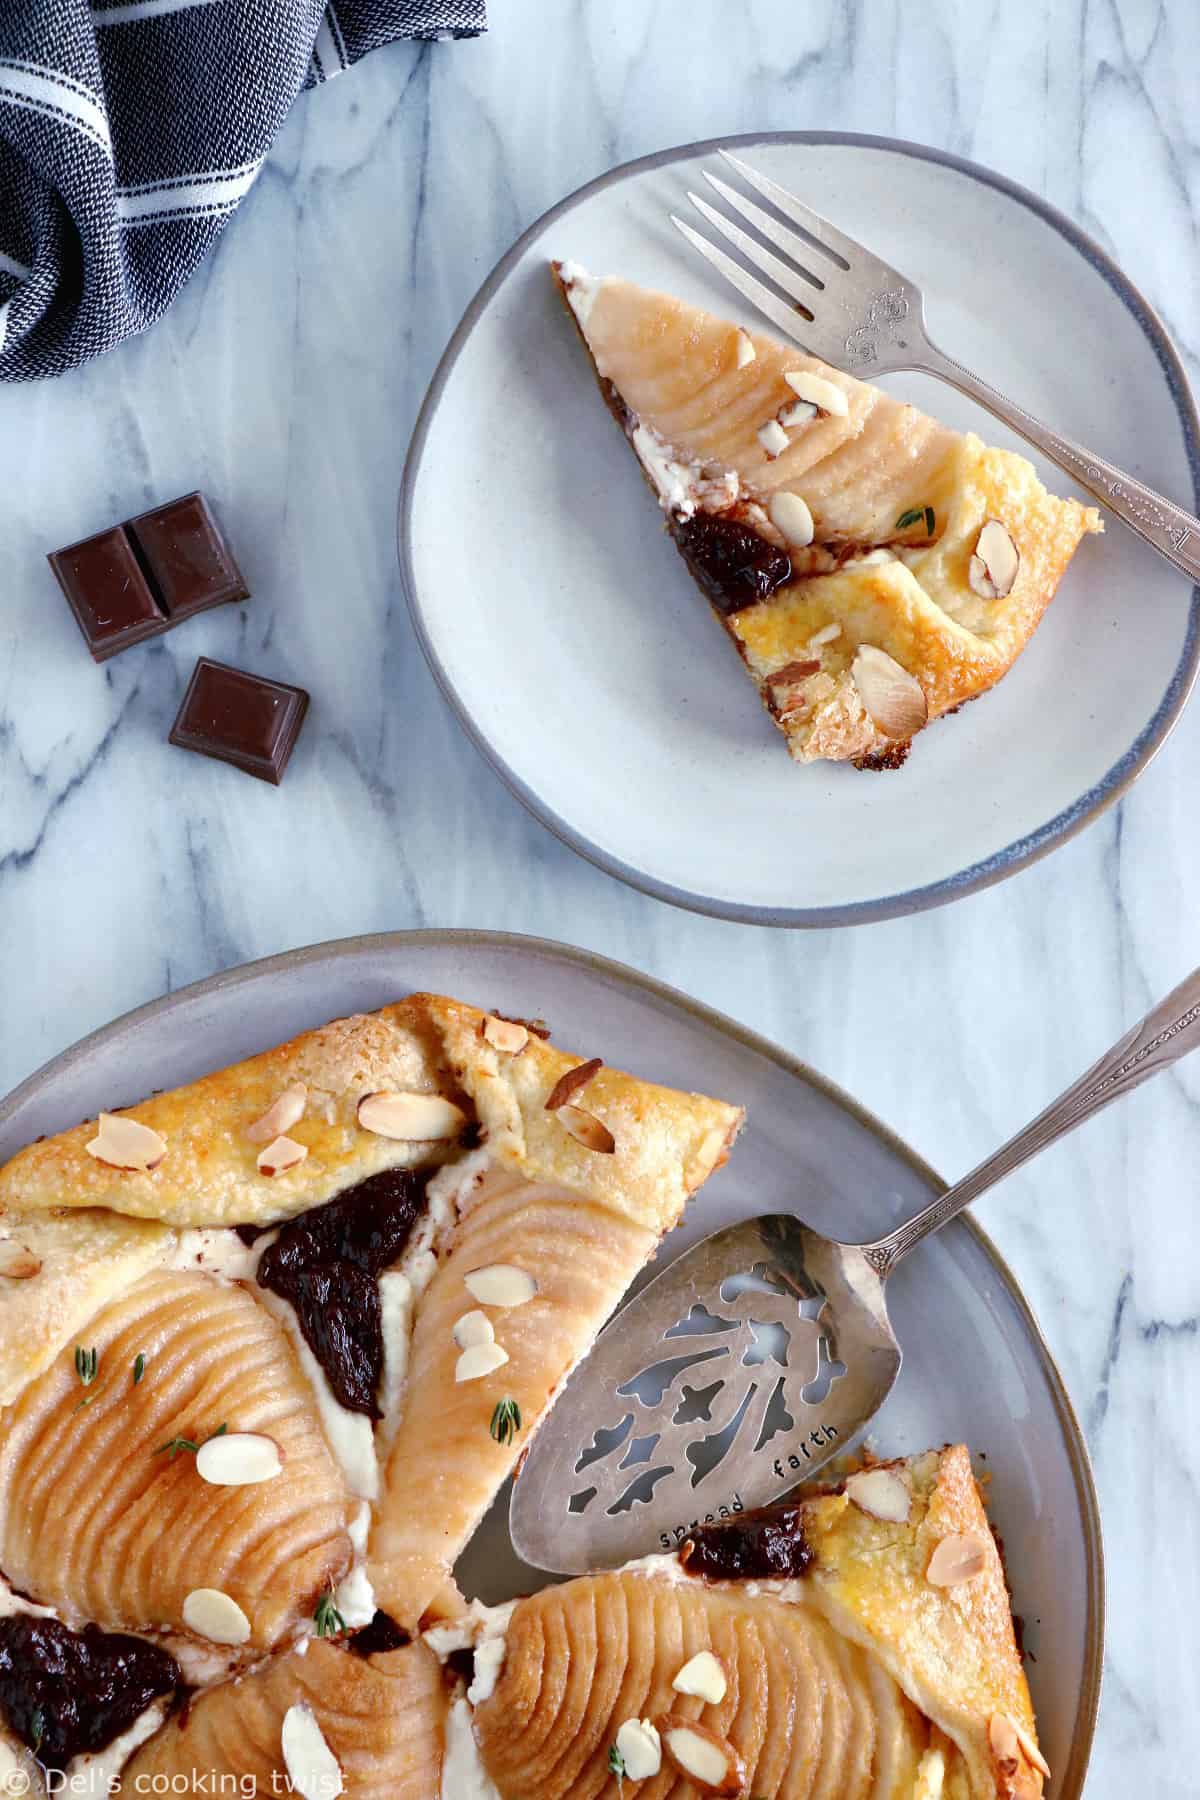 This rustic but elegant pear and chocolate ricotta galette comes in a folded-over flaky pie crust and makes for a lovely fruit dessert for lazy days.